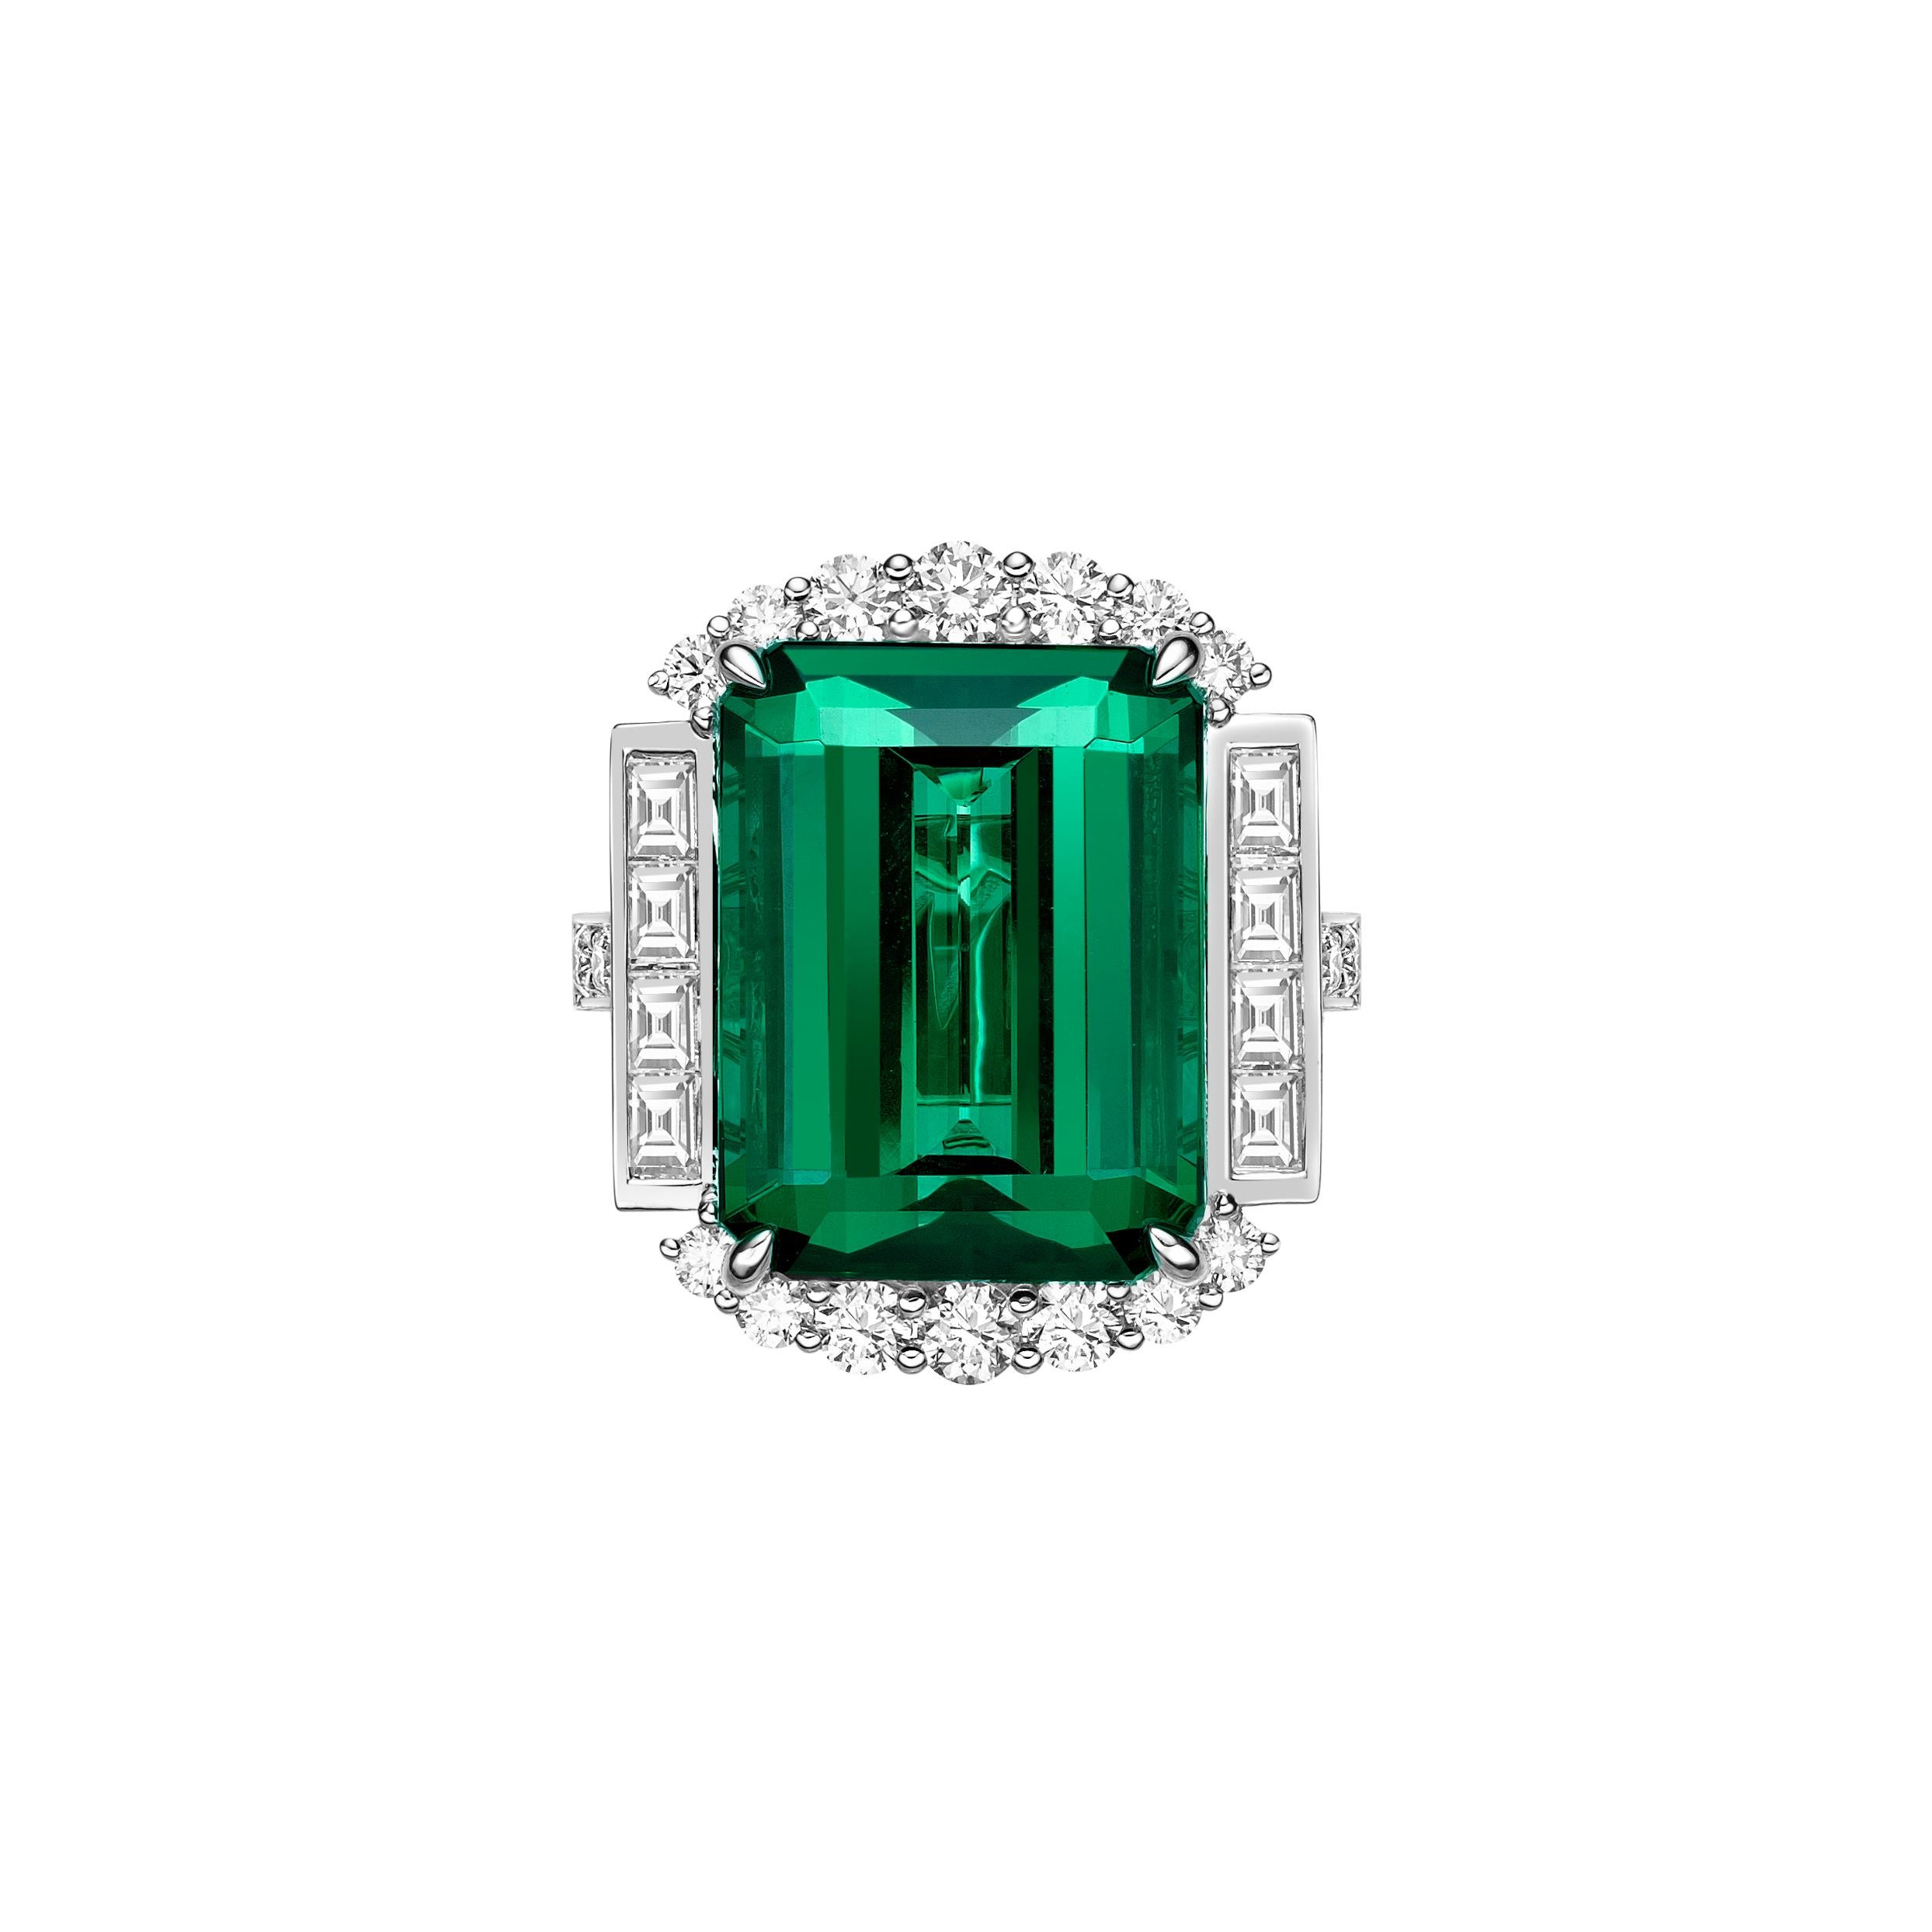 Contemporary 15.67 Carat Green Tourmaline Ring in 18Karat White Gold with Diamond.  For Sale